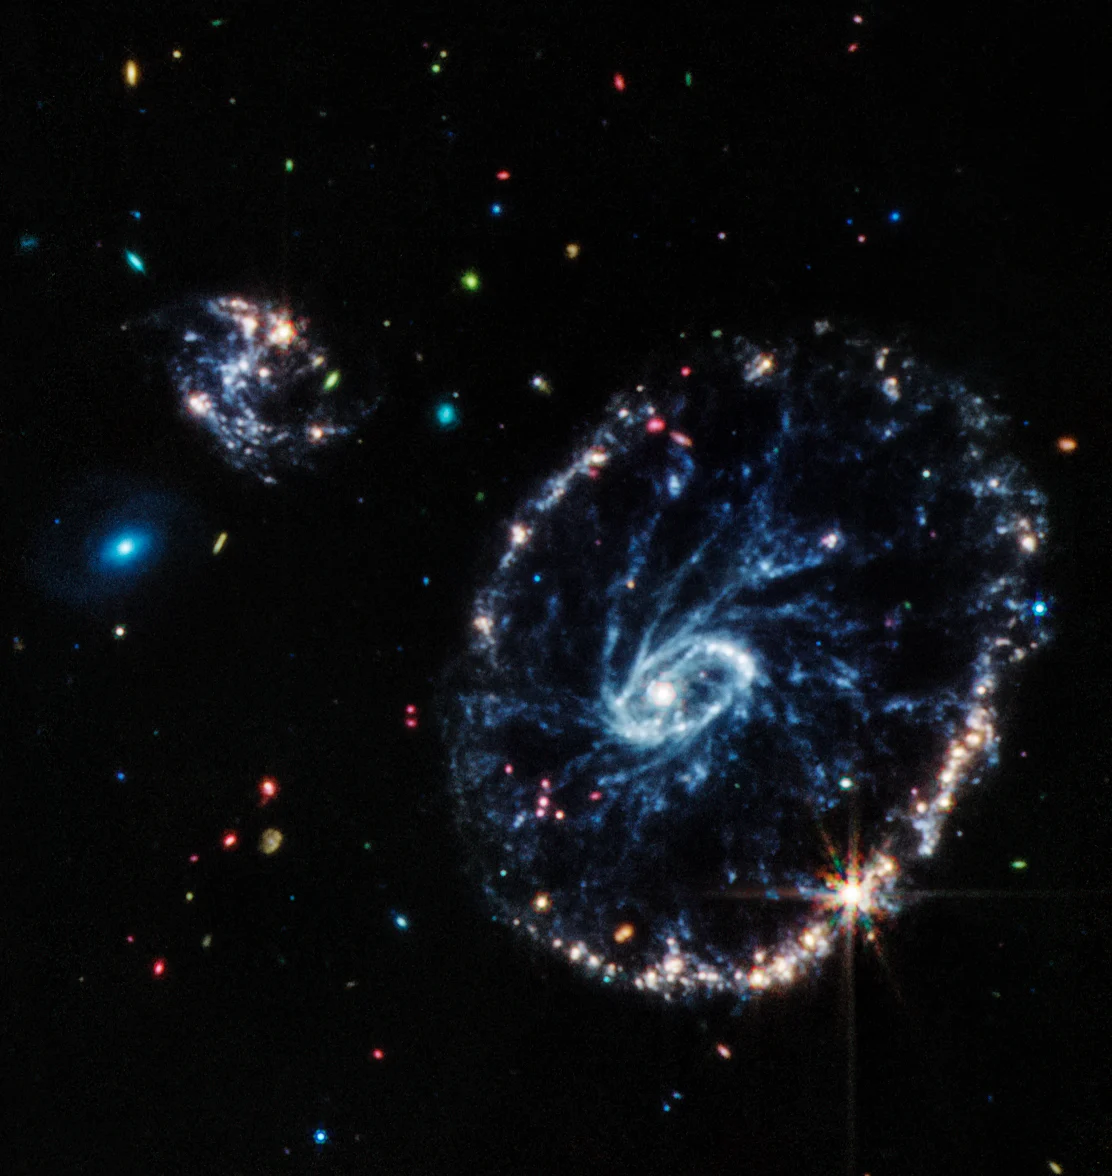 This image from Webb’s Mid-Infrared Instrument (MIRI) shows a group of galaxies, including a large distorted ring-shaped galaxy known as the Cartwheel. The Cartwheel Galaxy, located 500 million light-years away in the Sculptor constellation, is composed of a bright inner ring and an active outer ring. While this outer ring has a lot of star formation, the dusty area in between reveals many stars and star clusters.